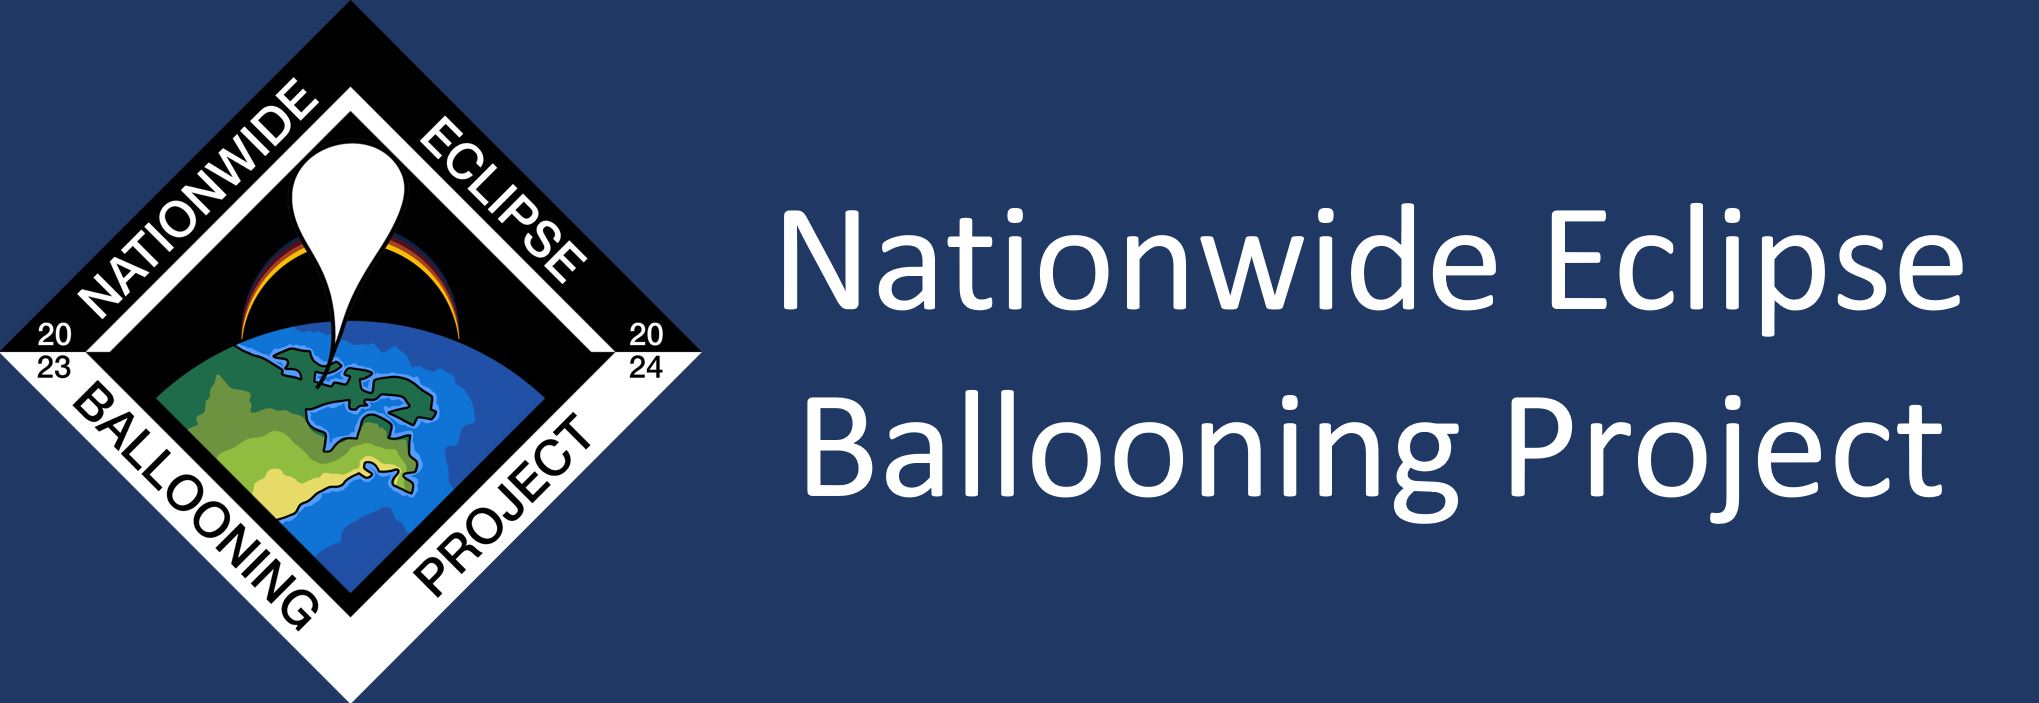 Eclipse Ballooning Project